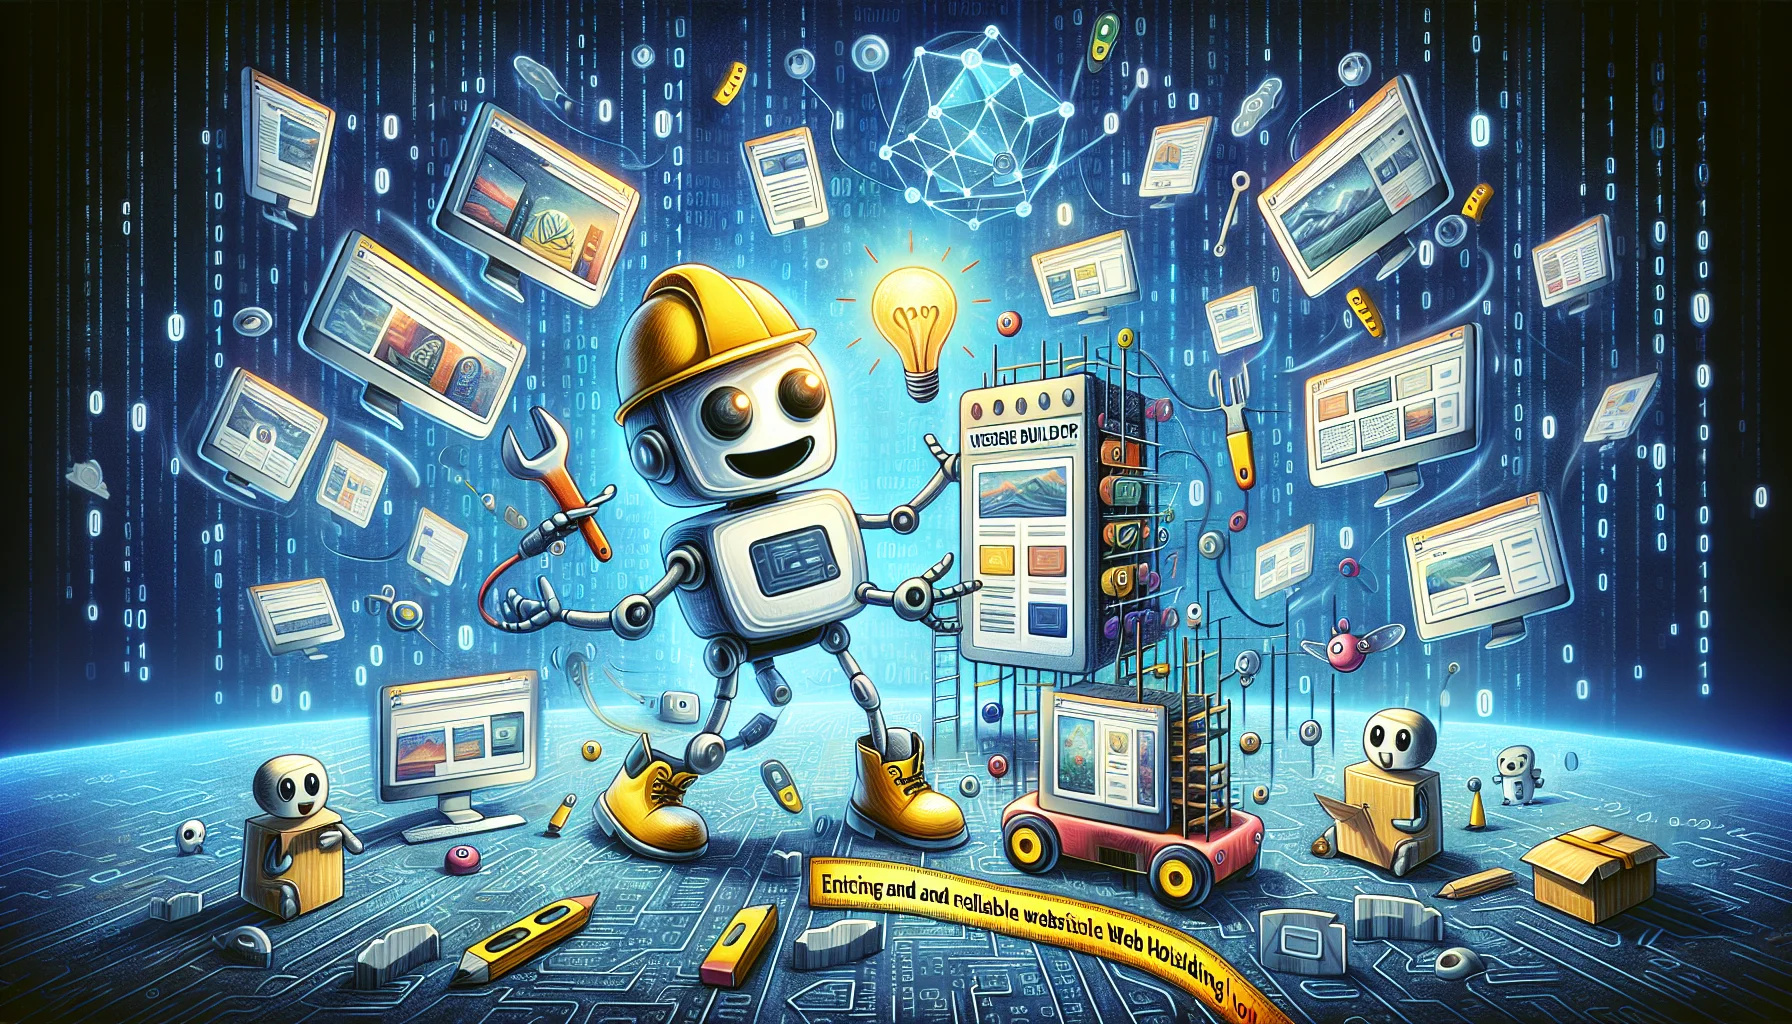 Create a whimsical image representing an abstract AI website builder at work. The AI, depicted as a friendly robot, is juggling multiple websites in different stages of construction. Emphasize the comedy by adding humorous elements: the robot could be wearing a hard hat and work boots, and one of the websites could be shaped like a playful animal. The backdrop can exhibit an enchanting digital environment replete with binary code and network signals. Include subtext that reads 'Enticing and Reliable Web Hosting'. Make sure the overall image prompts laughter and intrigue, emphasizing the fun, yet professional nature of web building.